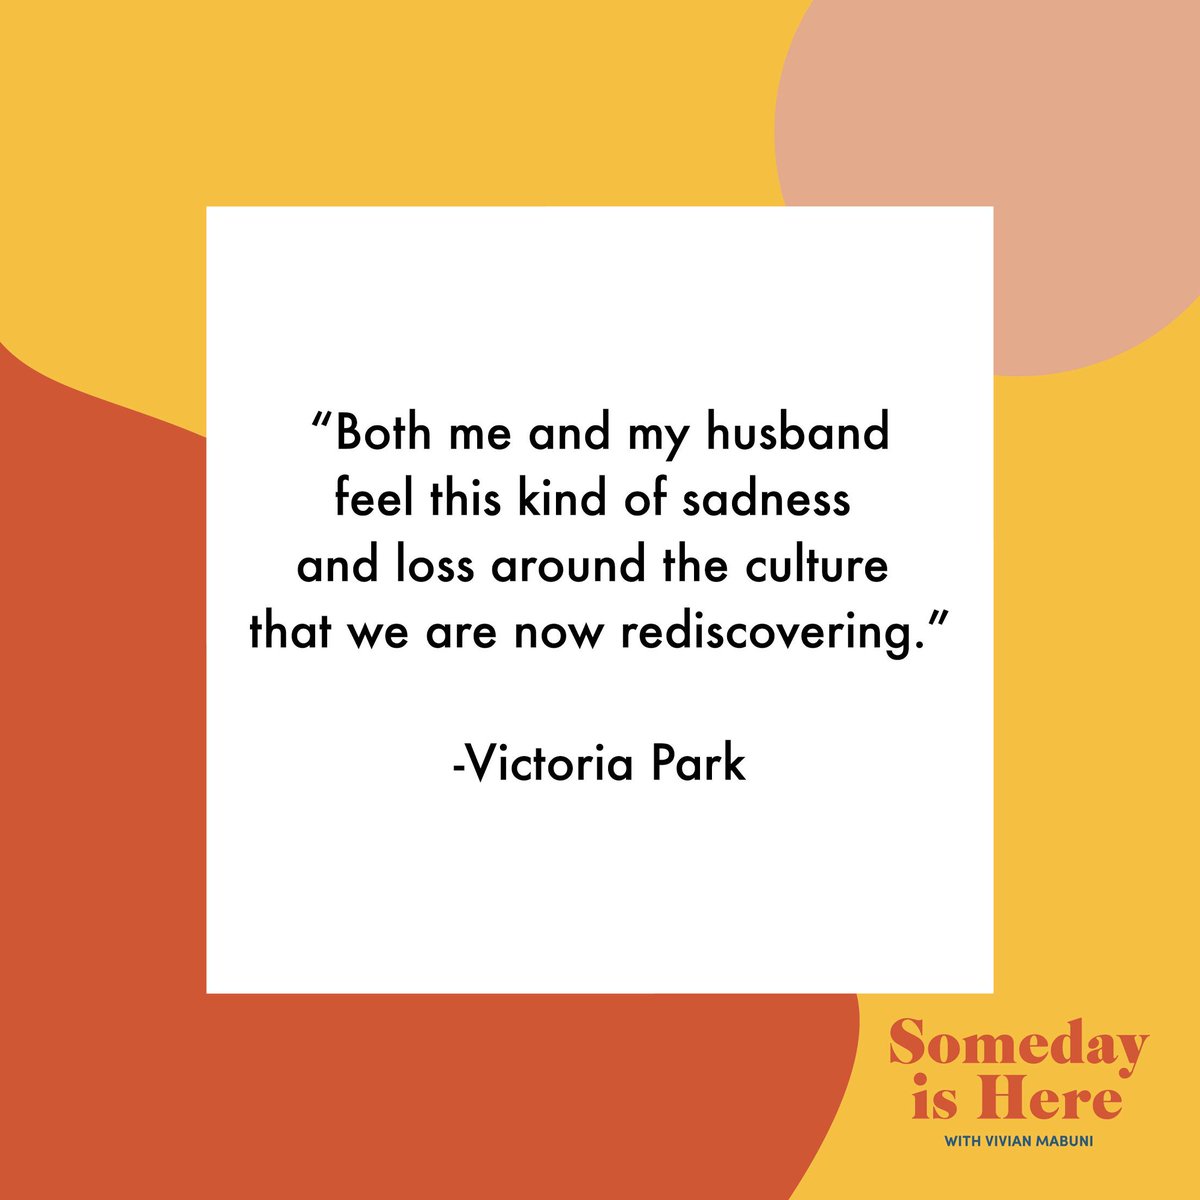 What are the points of pain you’ve experienced on your ethnic journey? Thank you @heybvp for sharing your story with us!
.
.
.
#asianamerican 
#RepresentationMatters 
#asianamericanwomen
#podcast
#asianwomen 
#asianamericanactress
#womeninleadership
#asiansinhollywood
#Diversity